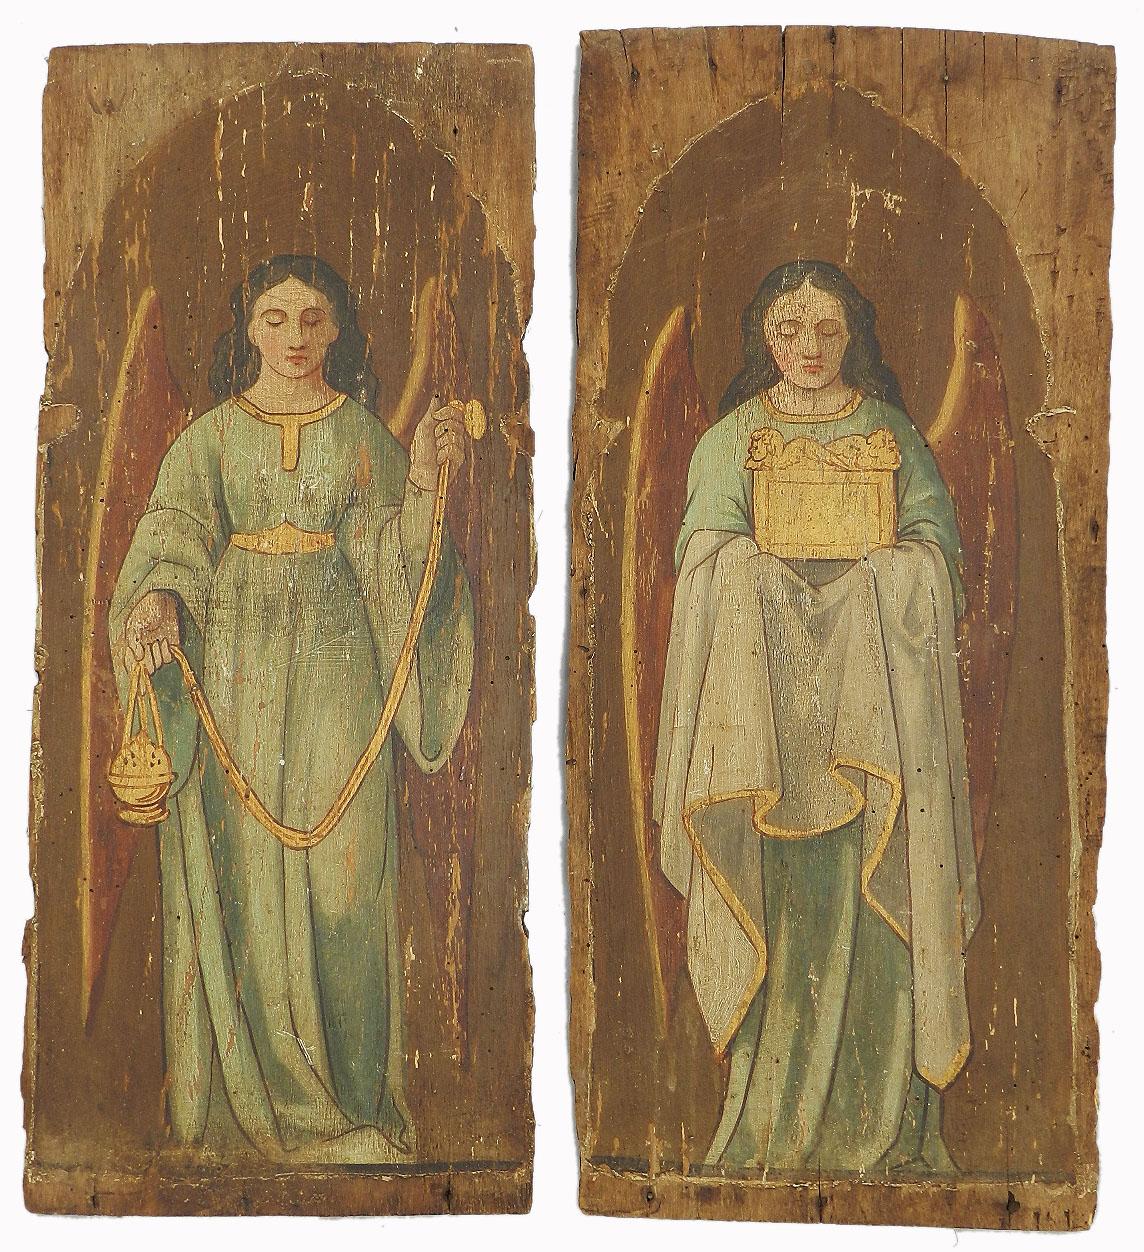 Unknown Figurative Painting - Pair 18th Century Paintings Angels on Wood Panels Naive French Provincial Church